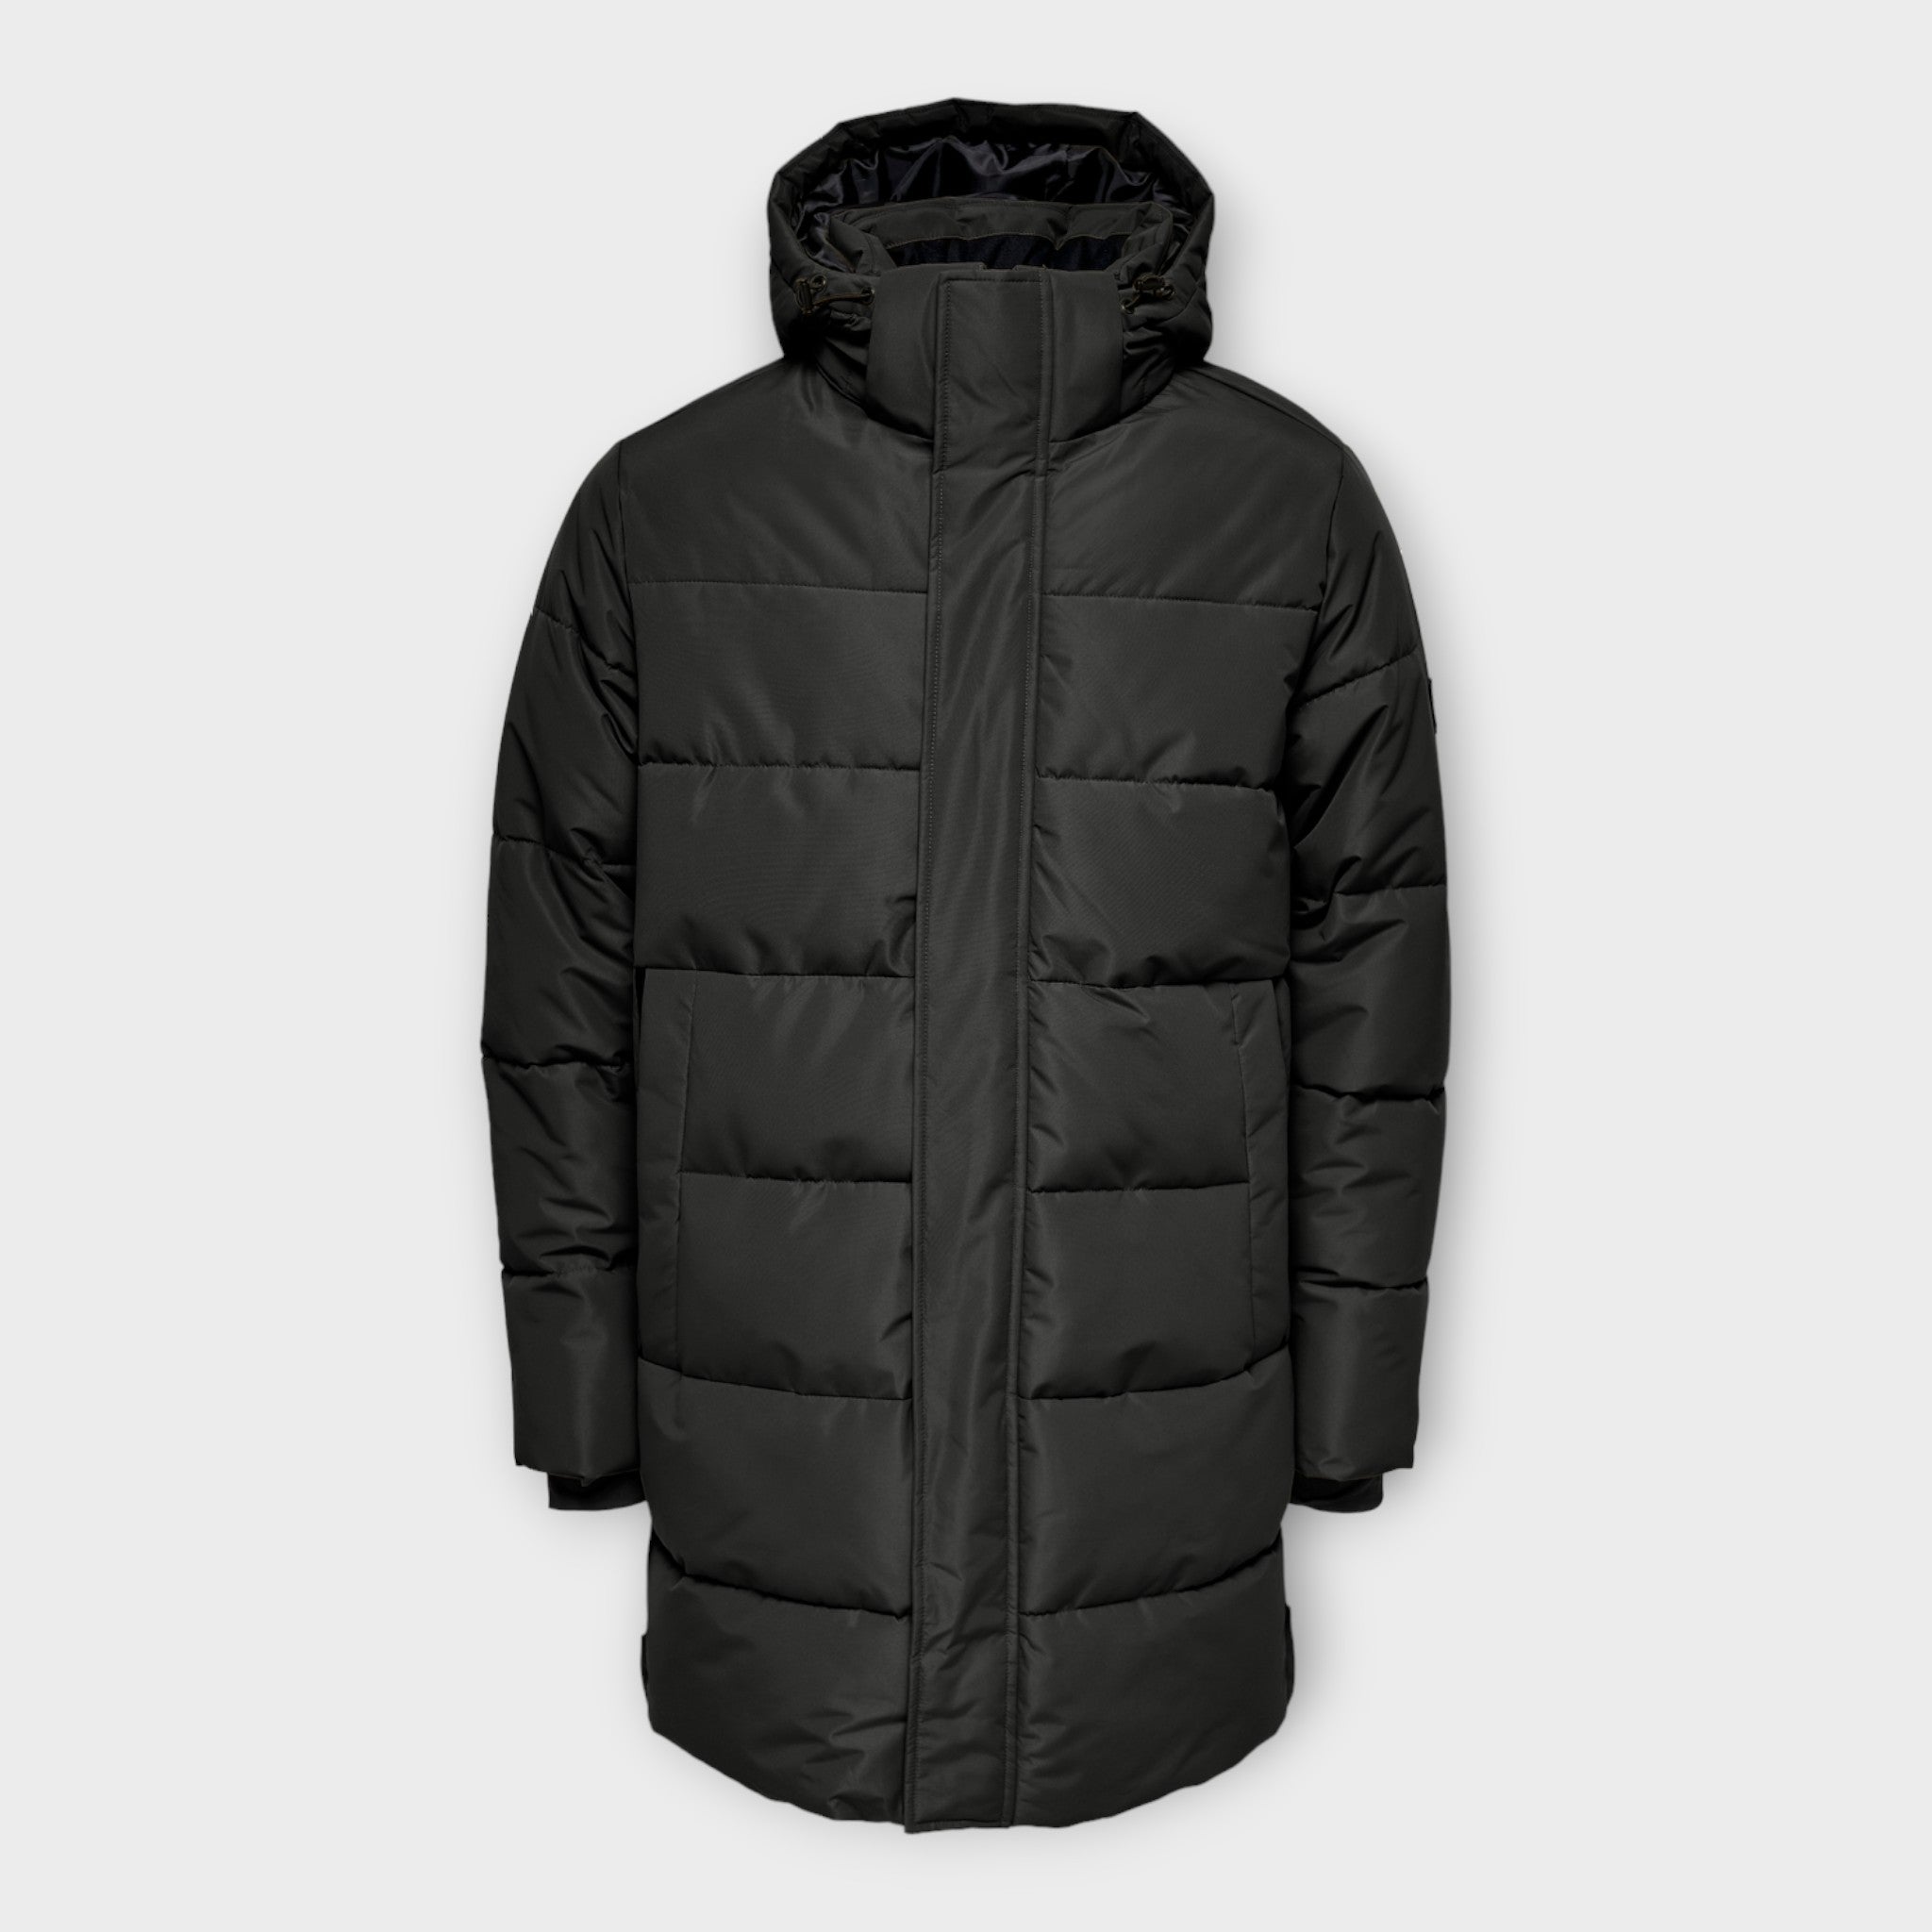 Carl Life Long Quilted Coat - Black